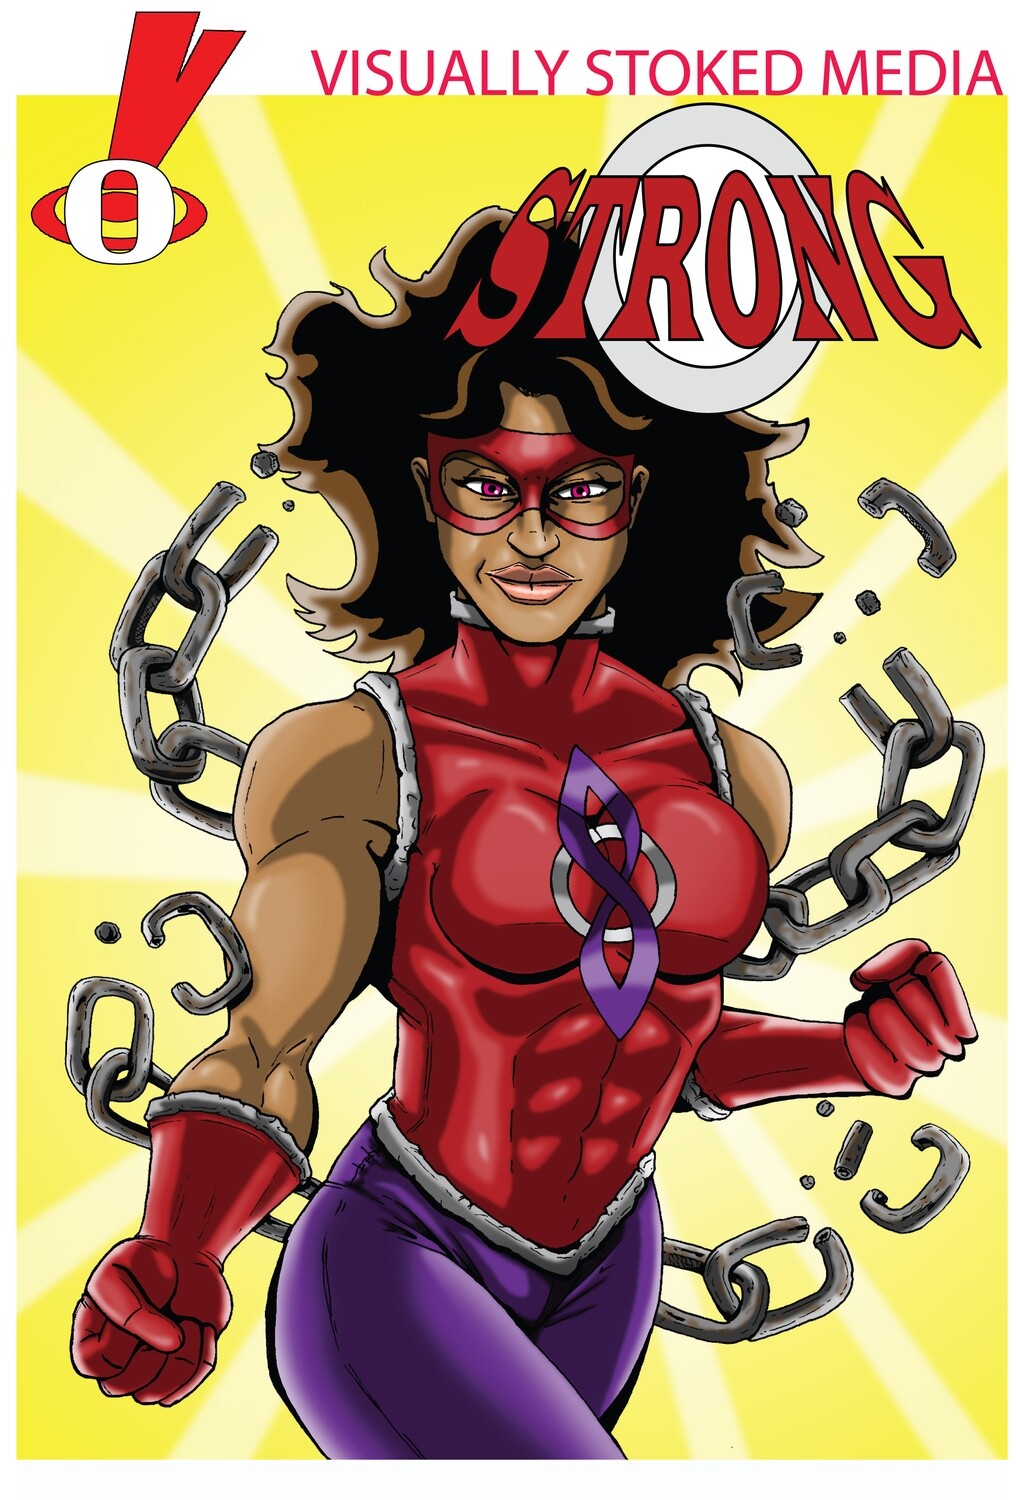 STRONG #0 (One-Shot, Pre-Order)